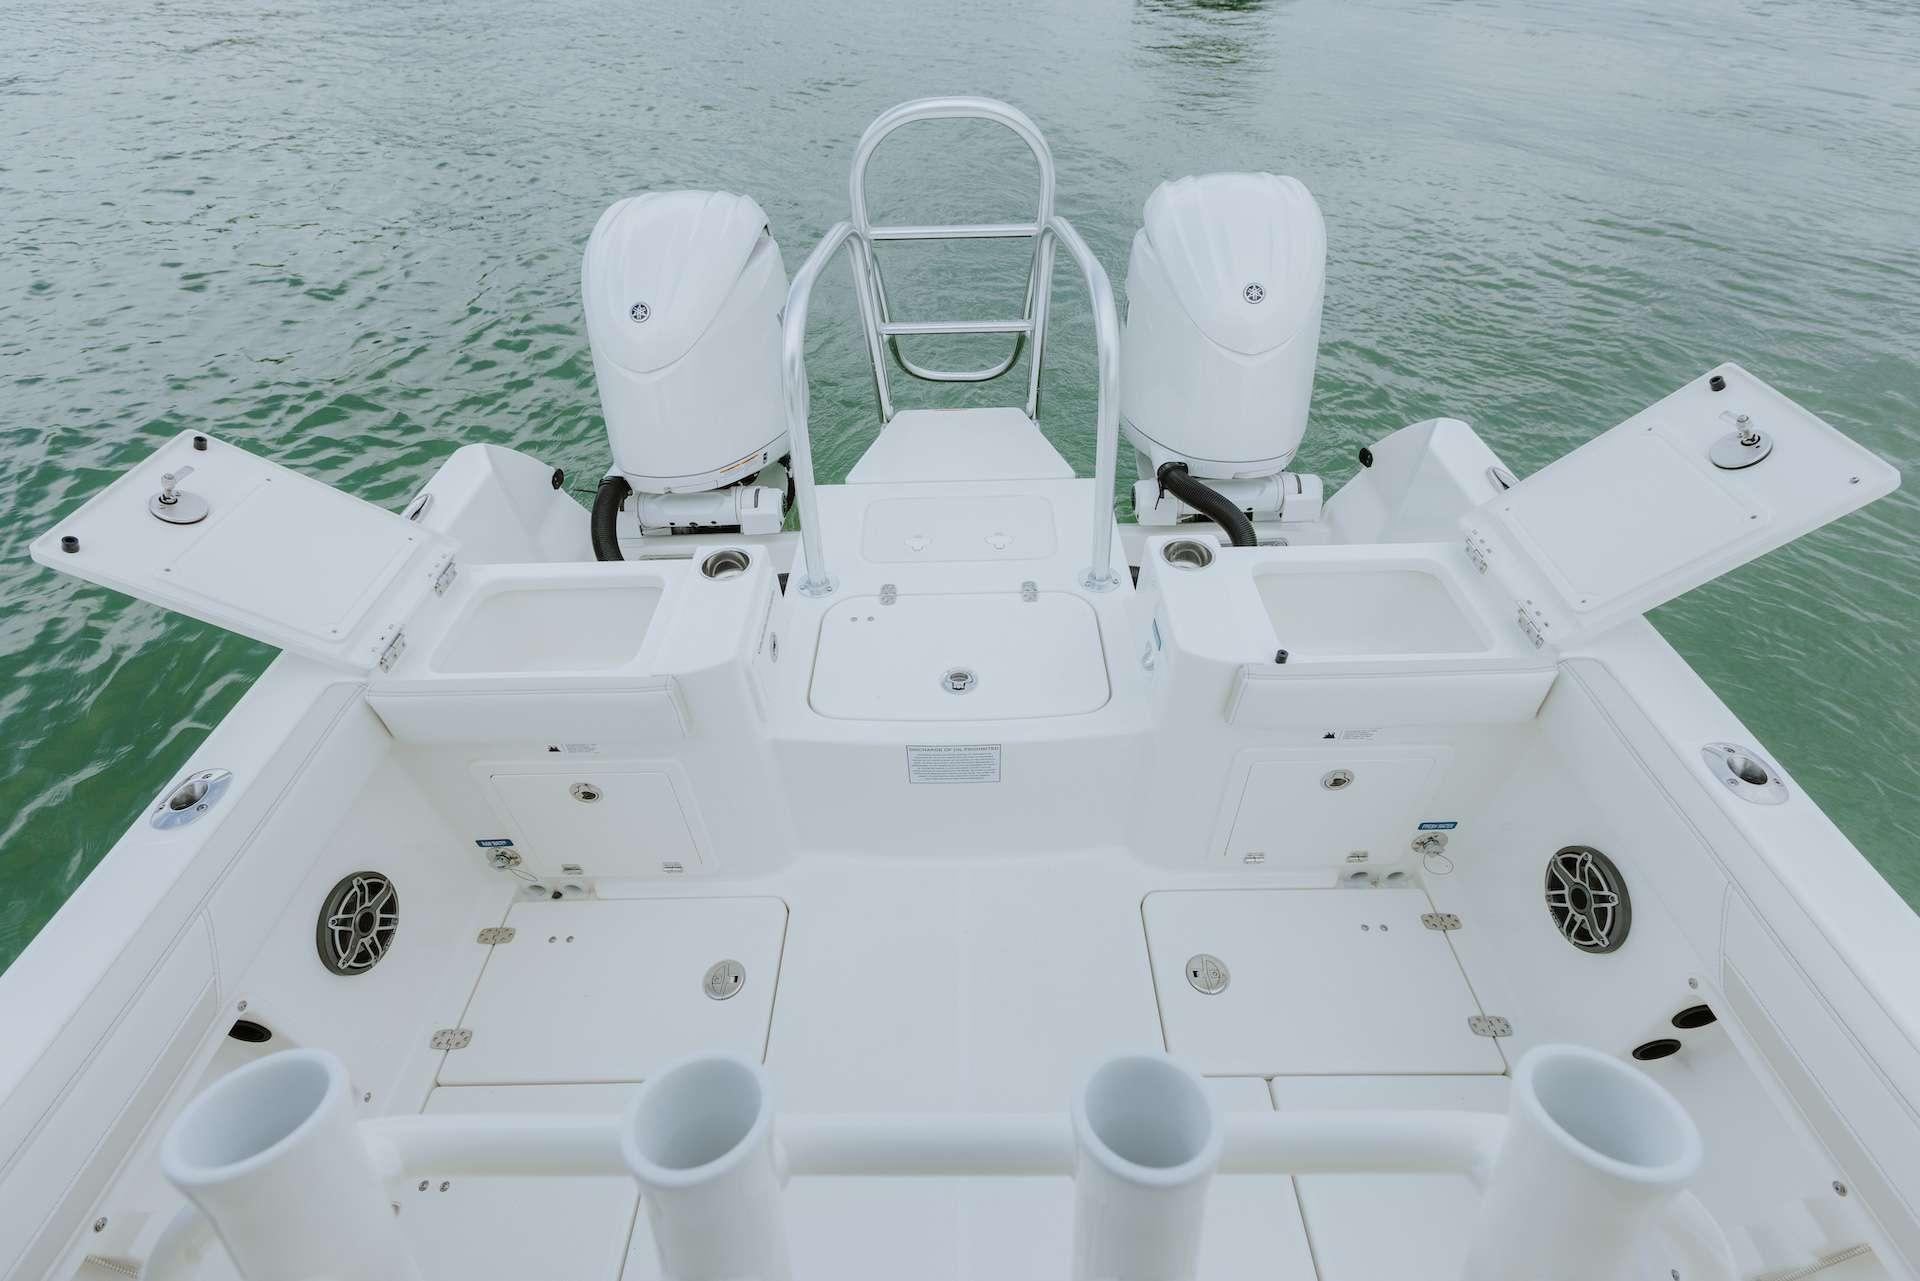 Boat Rocket Launchers,Swingback seats,Boat Arches,Leaning Post and Rod Racks  for Boats